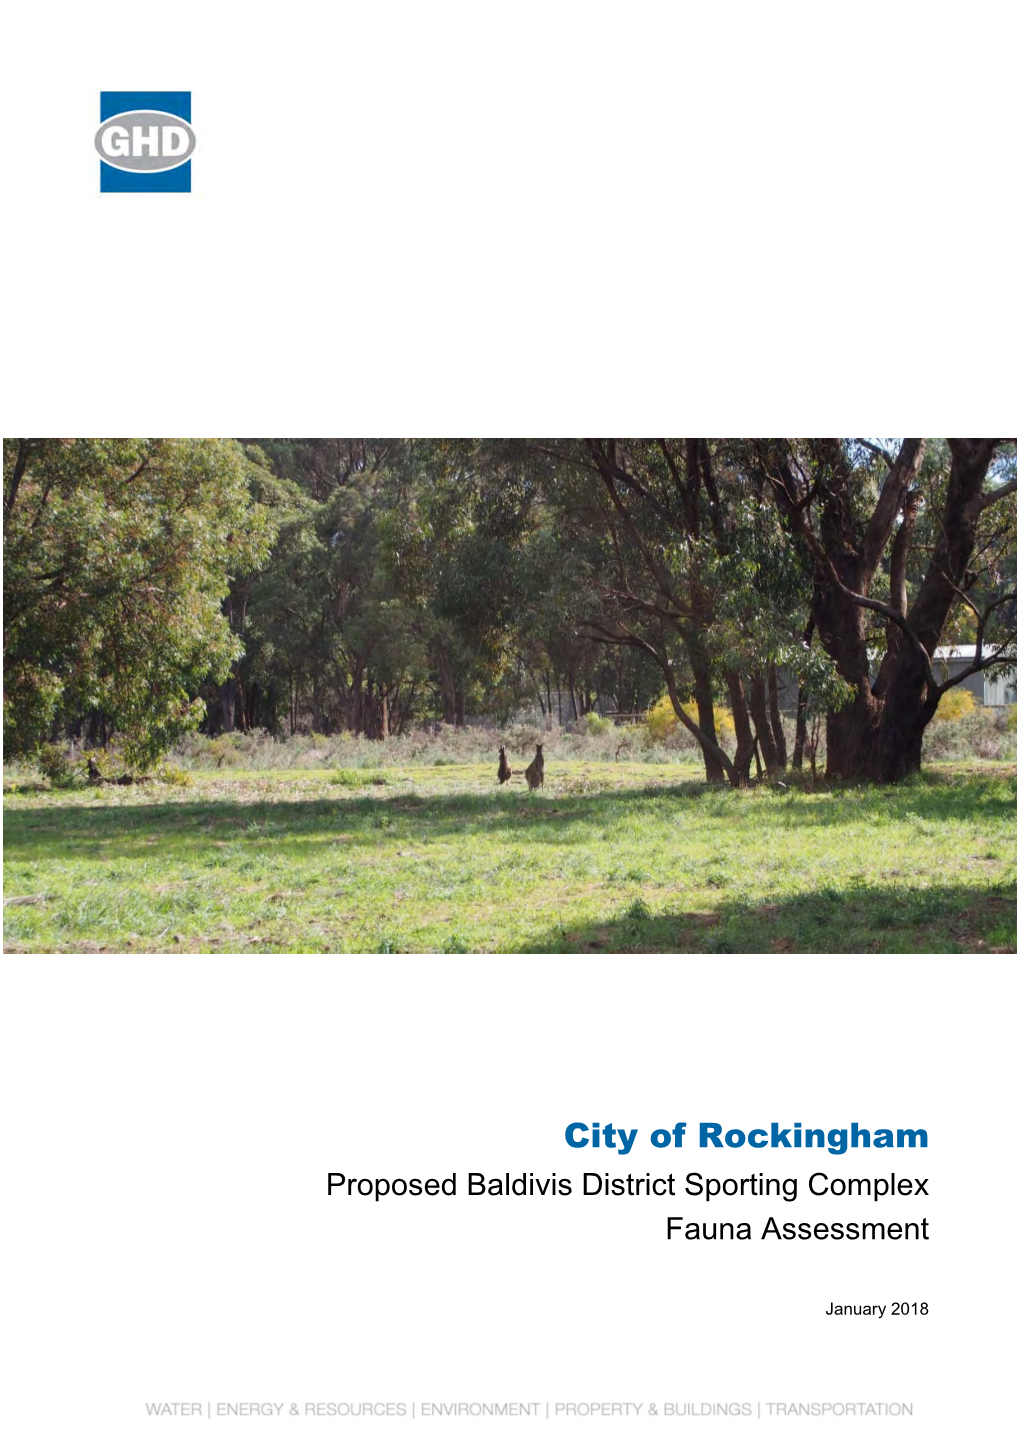 City of Rockingham Proposed Baldivis District Sporting Complex Fauna Assessment